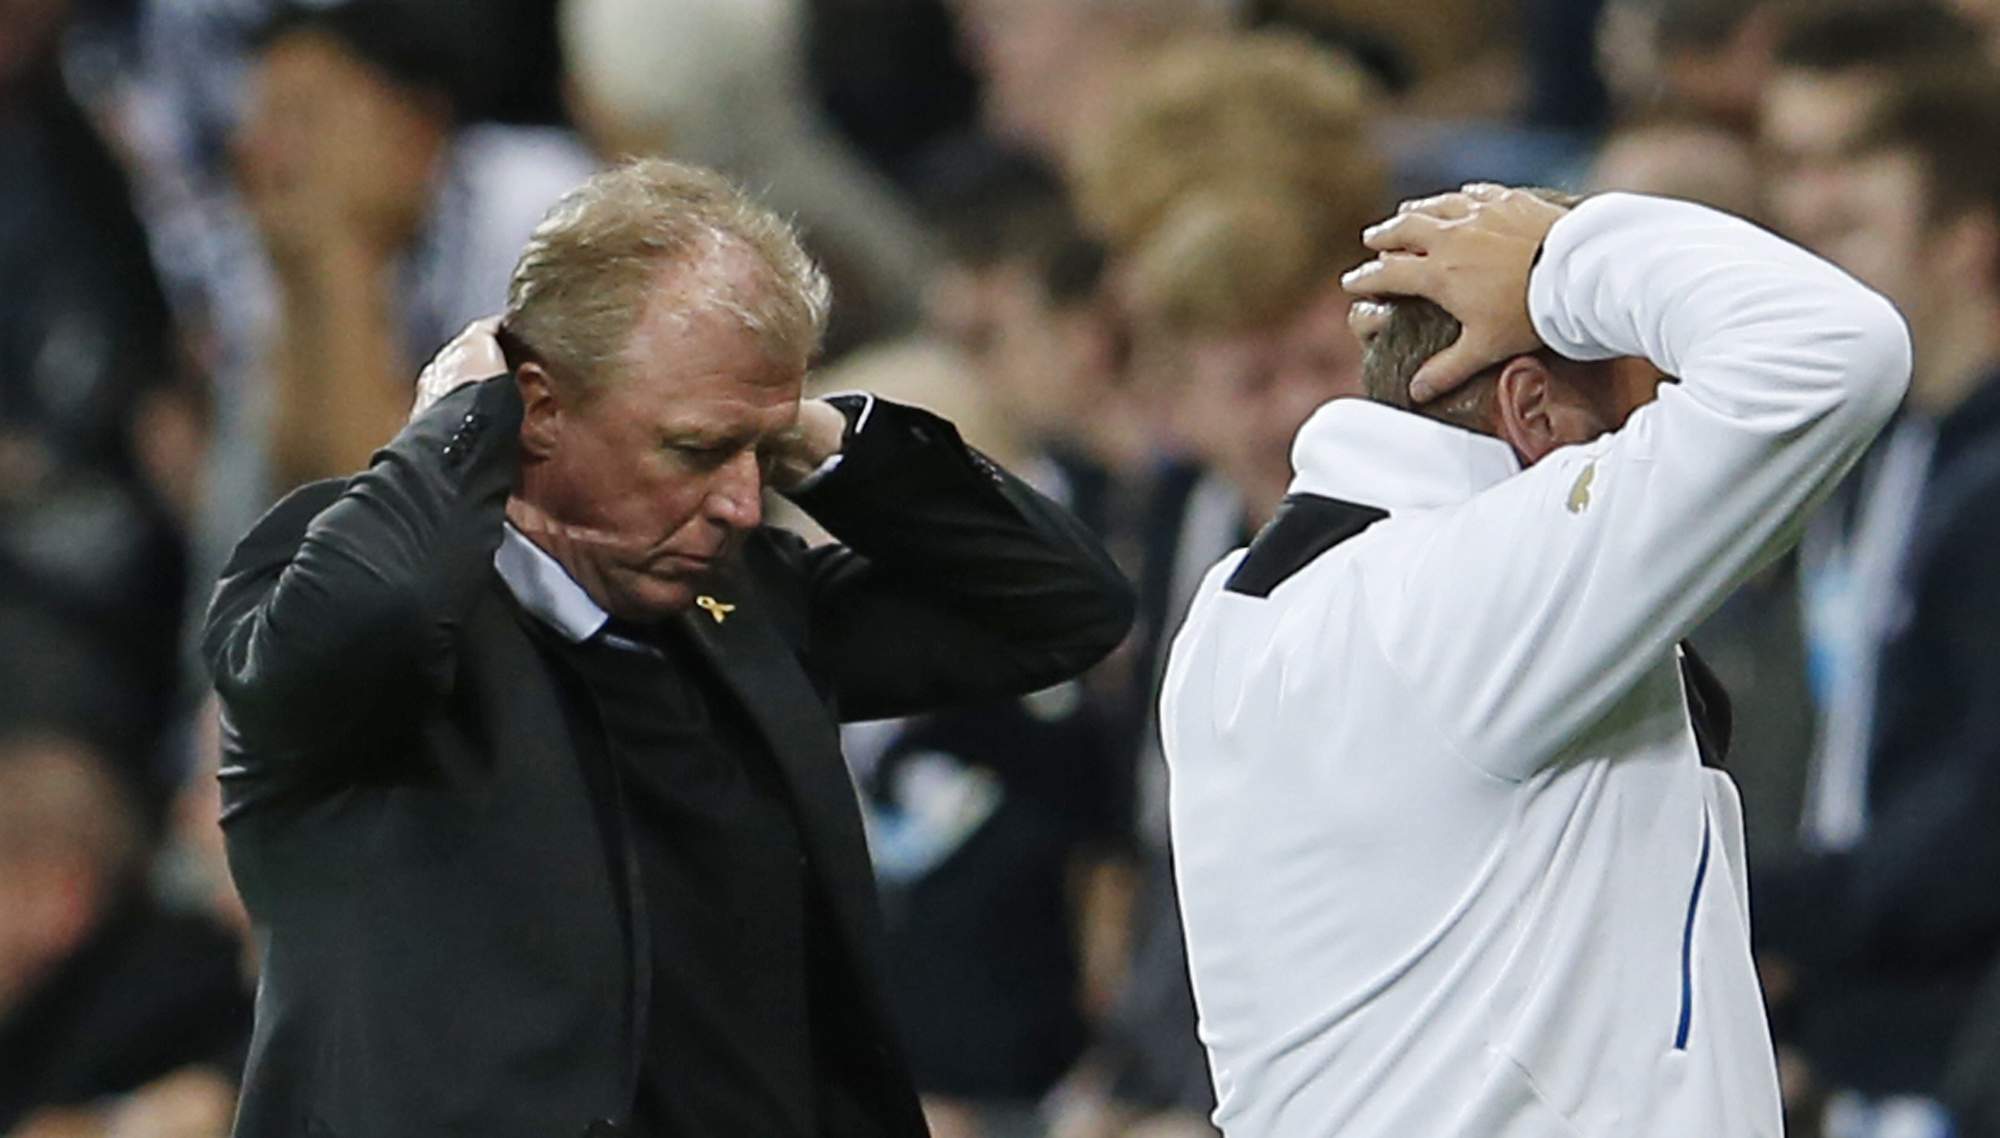 Football - Newcastle United v Sheffield Wednesday - Capital One Cup Third Round - St James' Park - 23/9/15 Newcastle United manager Steve McClaren looks dejected with assistant manager Paul Simpson Action Images via Reuters / Lee Smith Livepic EDITORIAL USE ONLY. No use with unauthorized audio, video, data, fixture lists, club/league logos or "live" services. Online in-match use limited to 45 images, no video emulation. No use in betting, games or single club/league/player publications.  Please contact your account representative for further details.